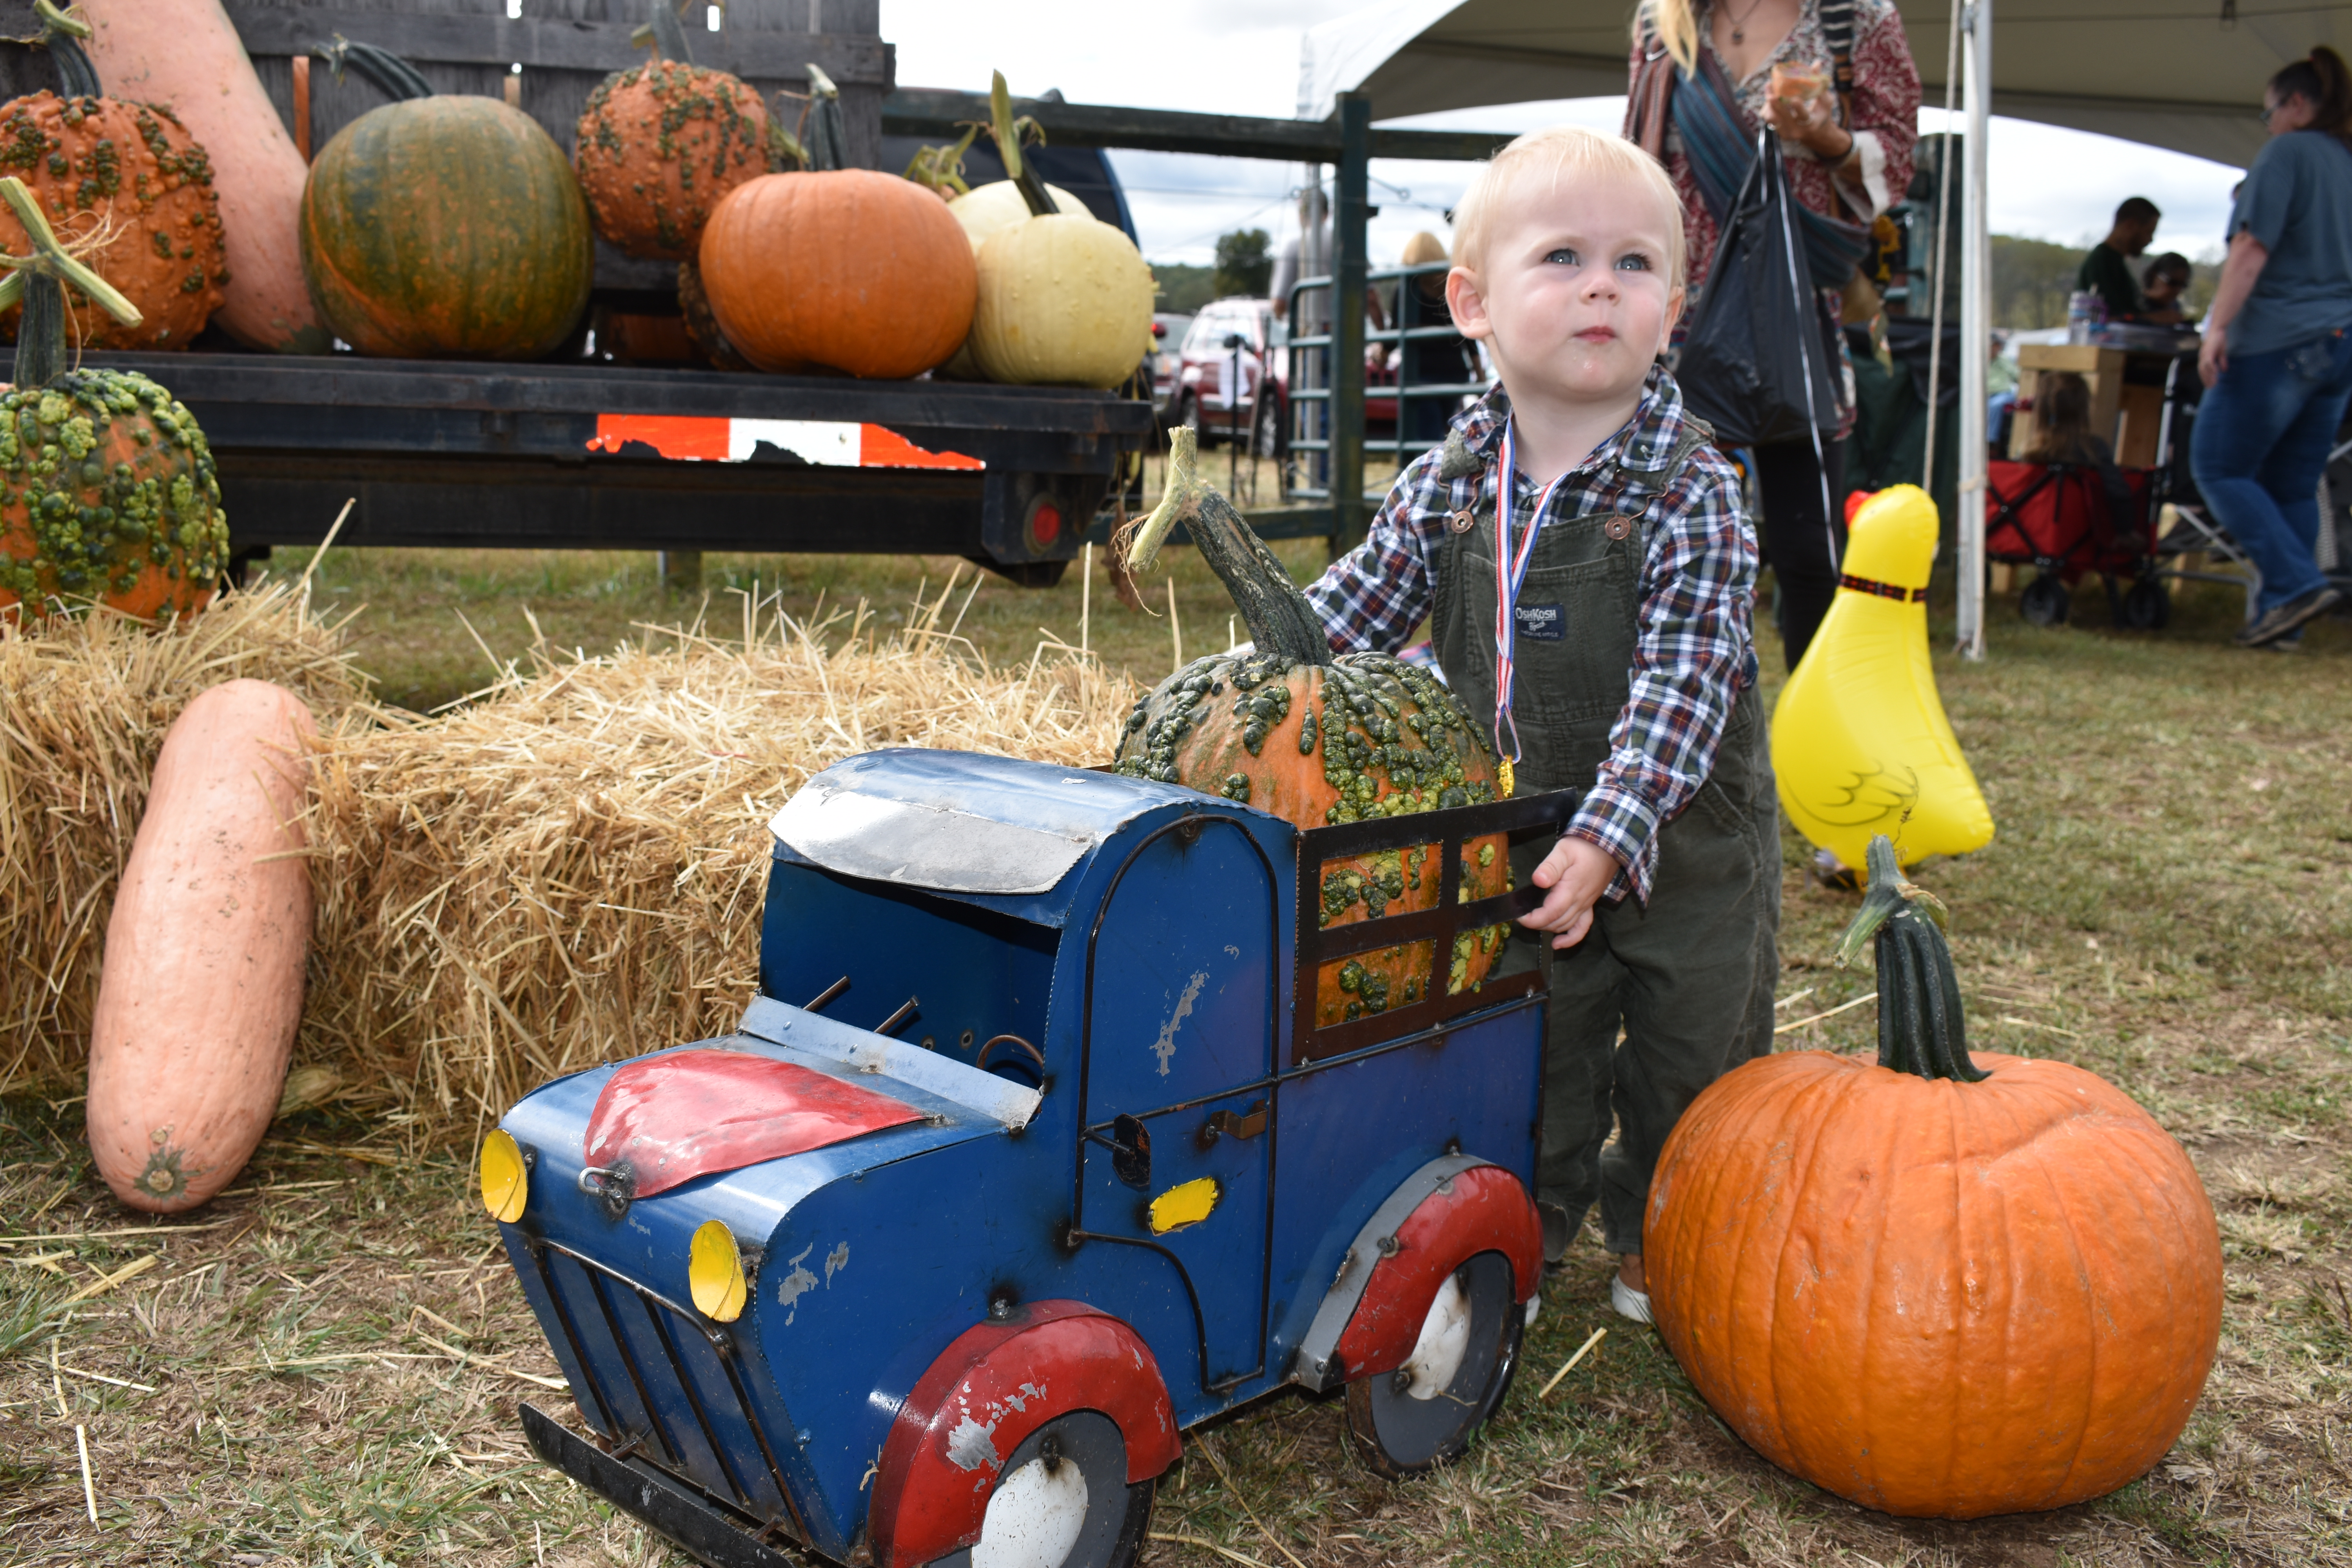 Miles Green, 1 year old from Blairsville, found an interesting spot at the entrance to the Punkin Chunkin.